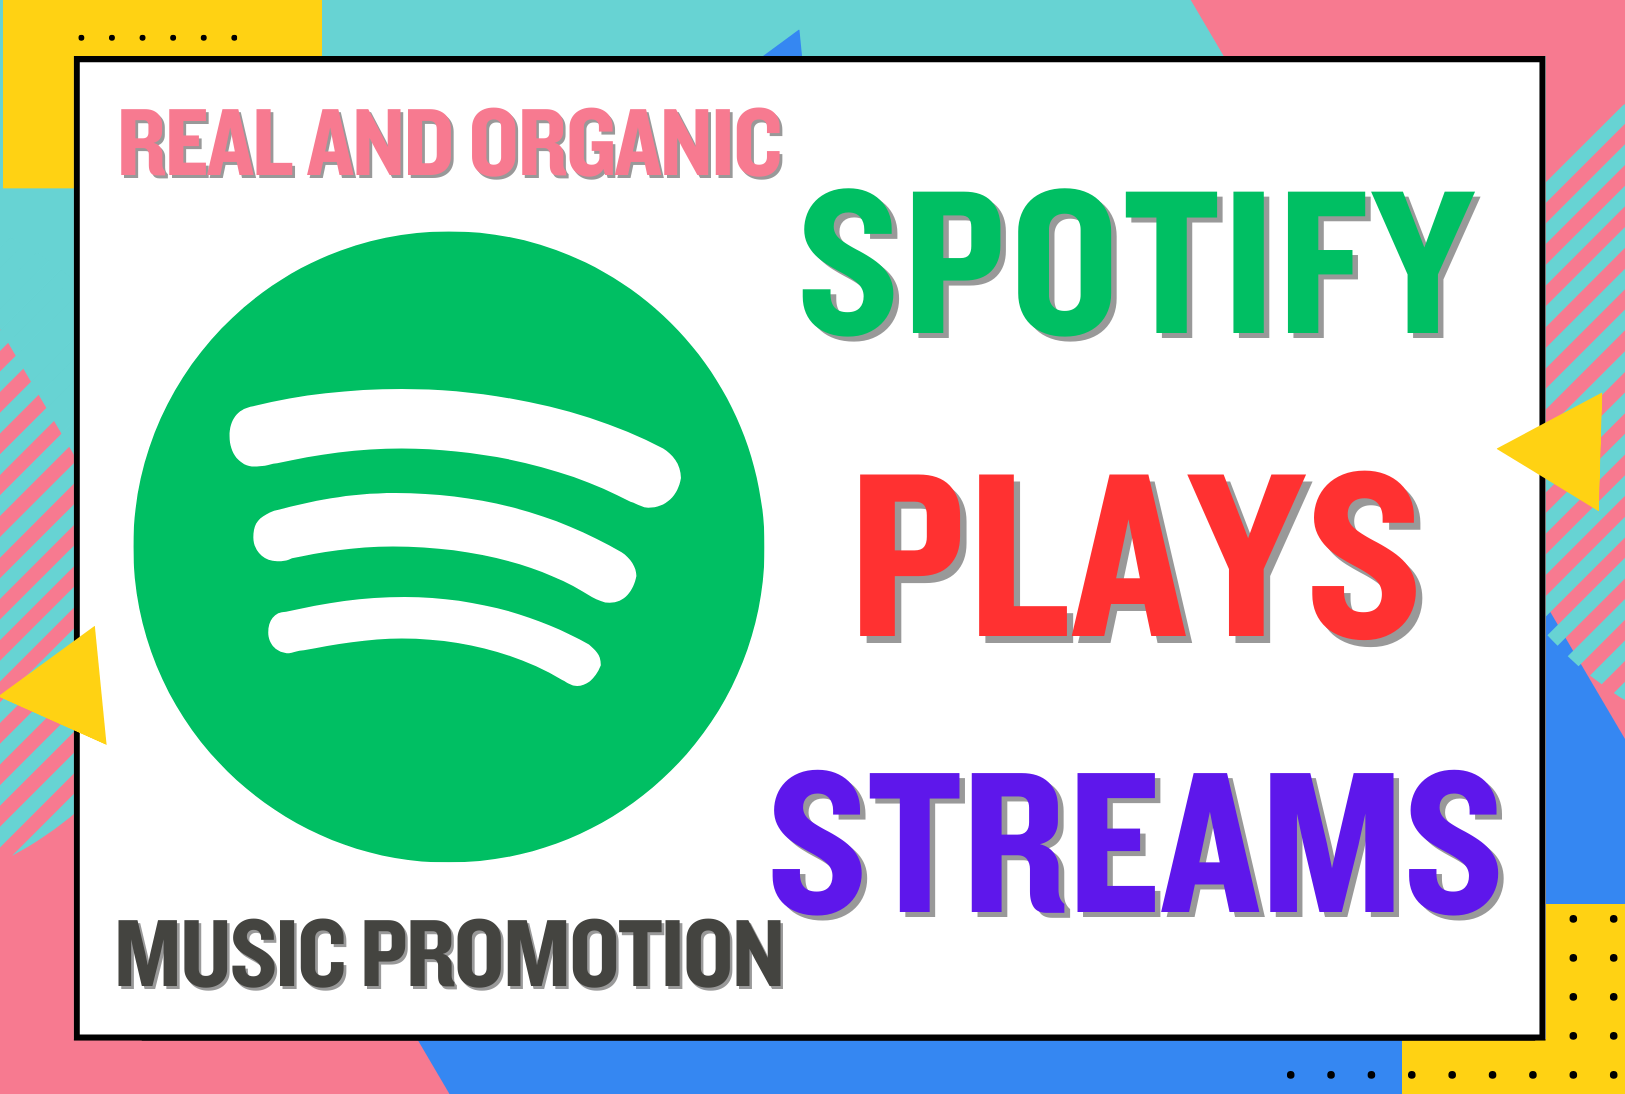 10,000 Spotify plays streams HQ accounts | Promote your Spotify music and make it viral